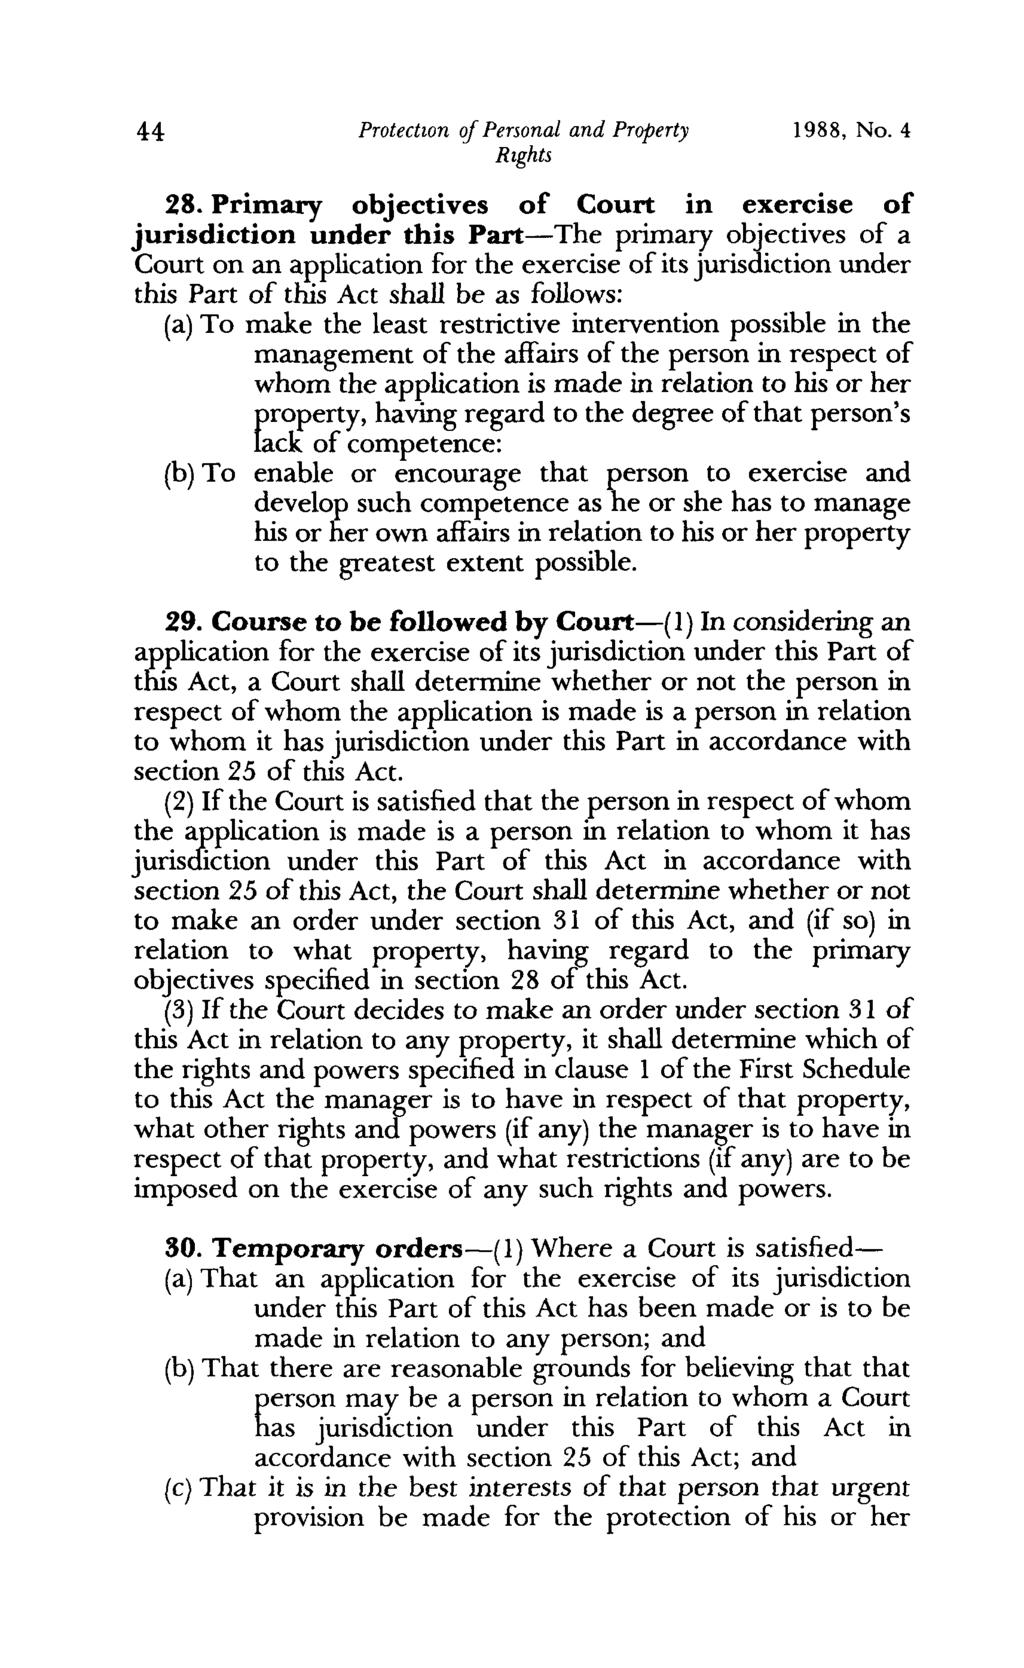 44 Protectwn of Personal and Property RIghts 1988, No. 4 28.